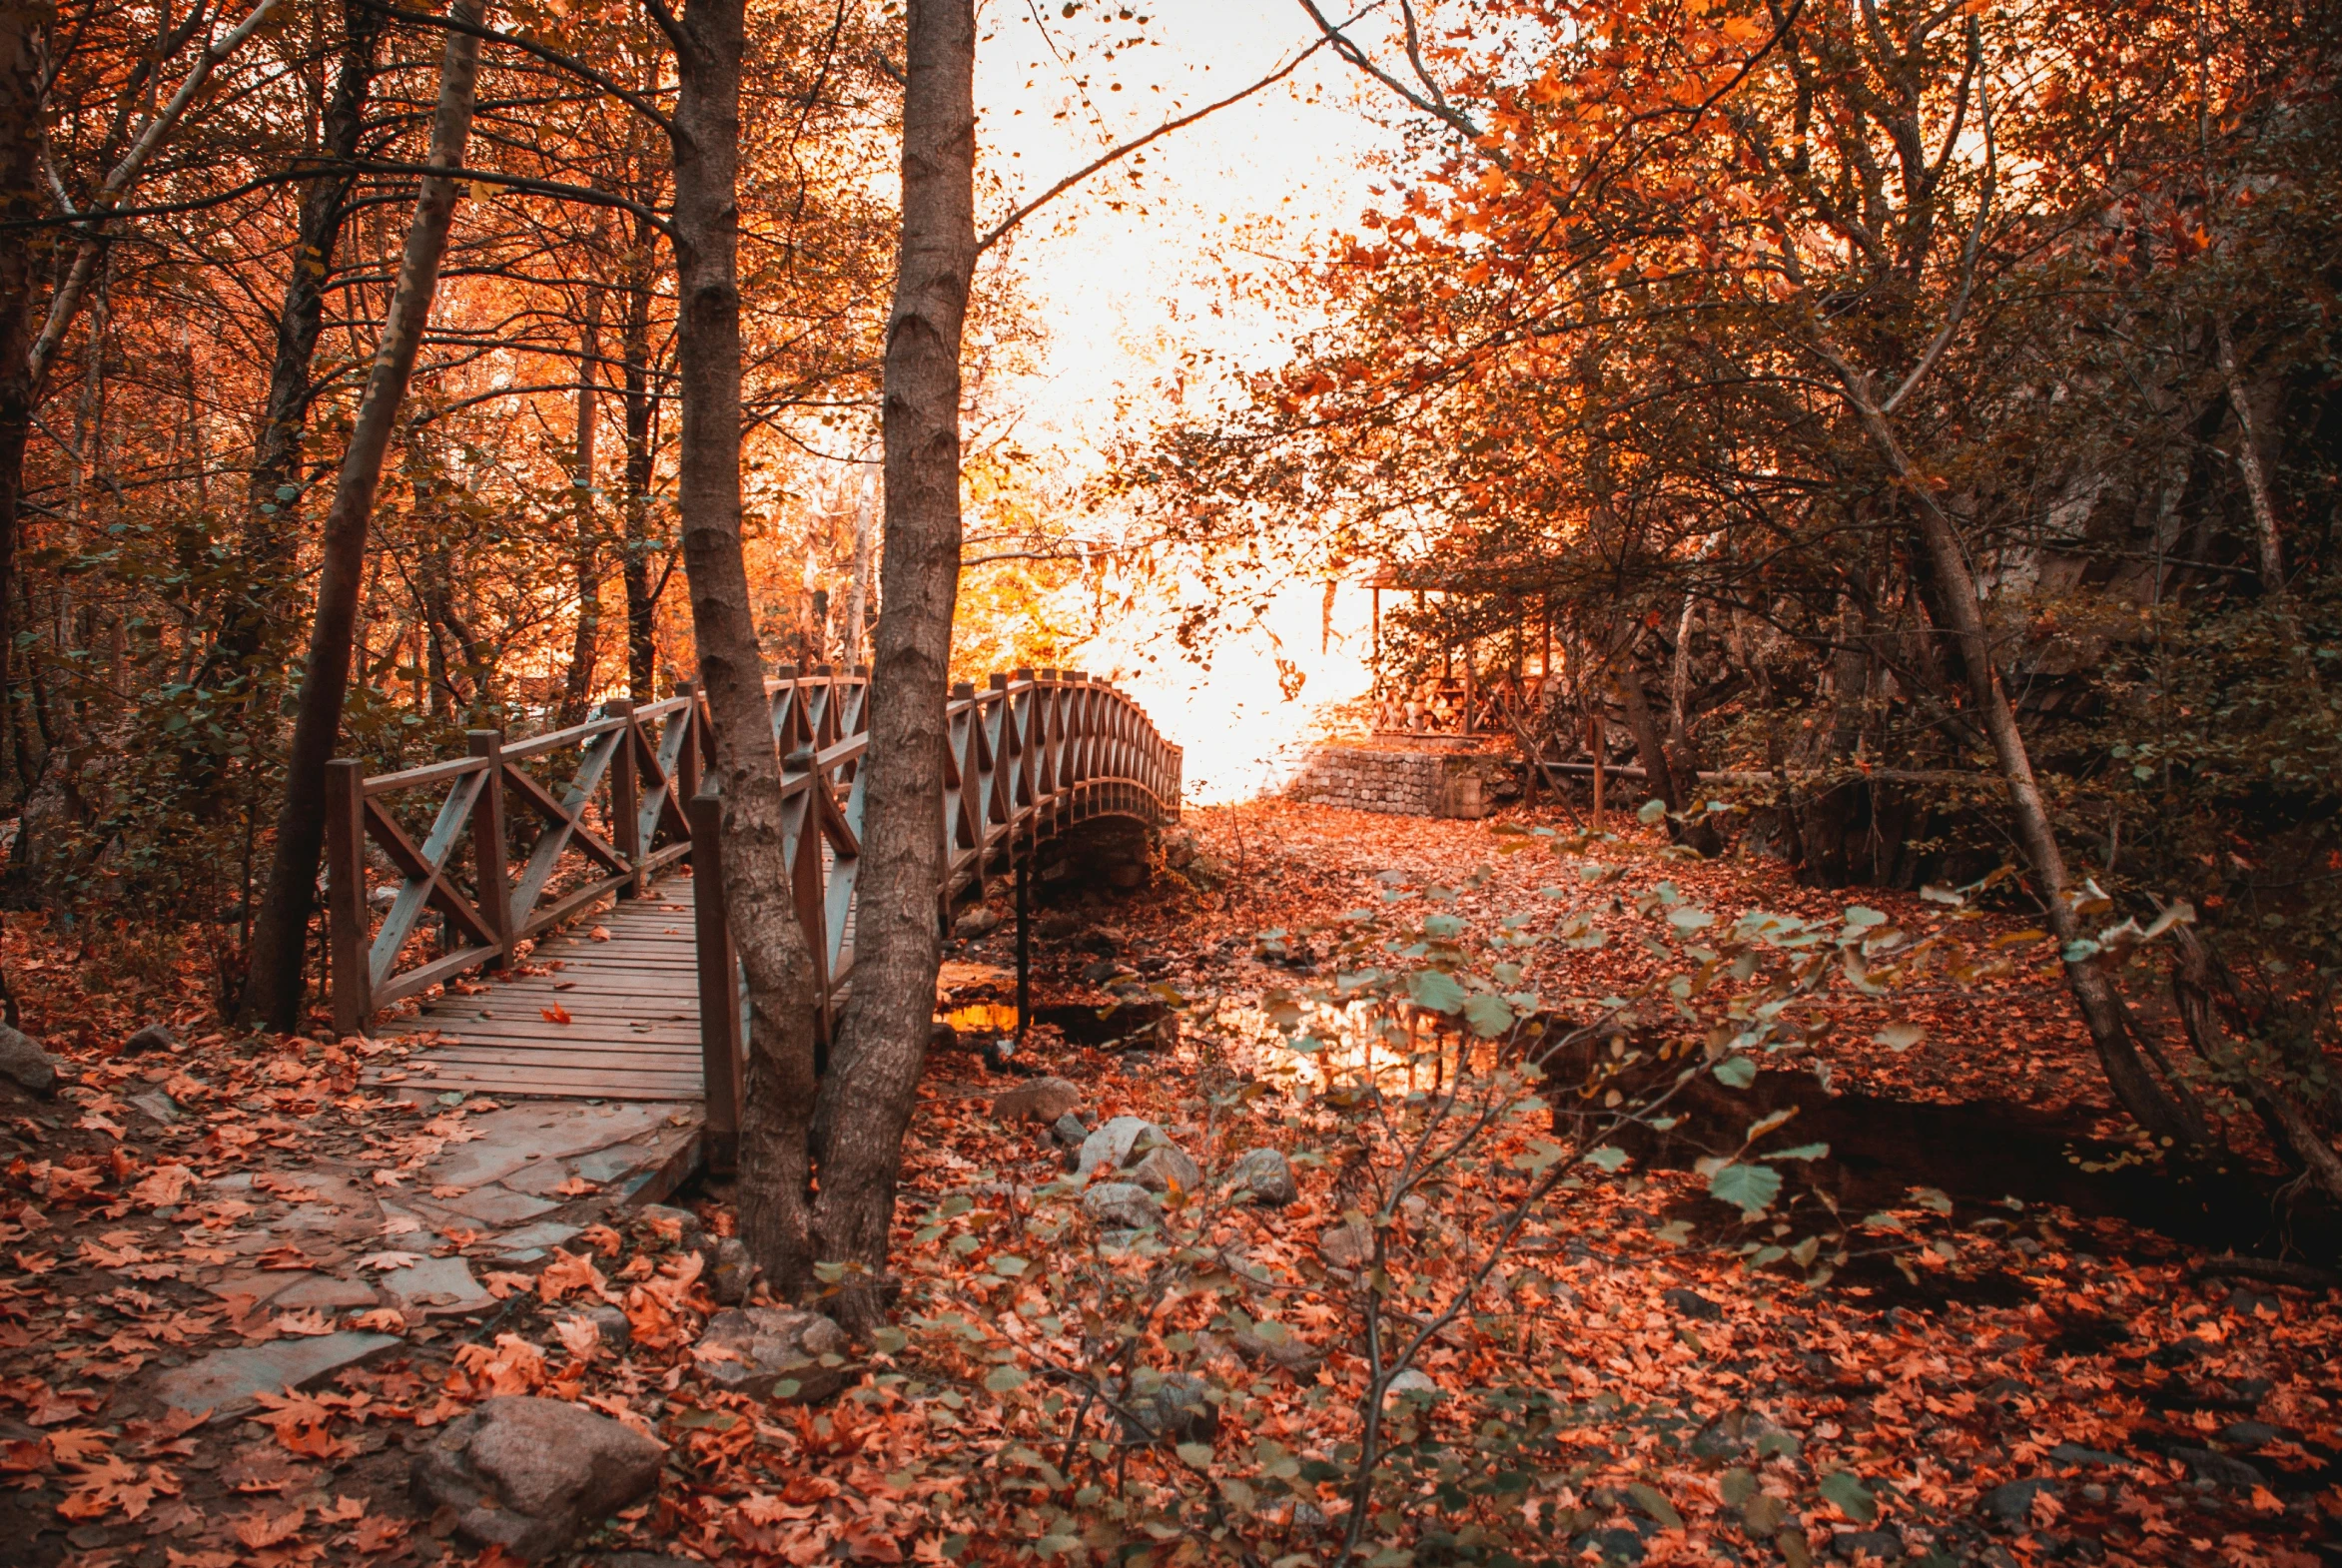 bridge going over fallen leaves in the middle of forest